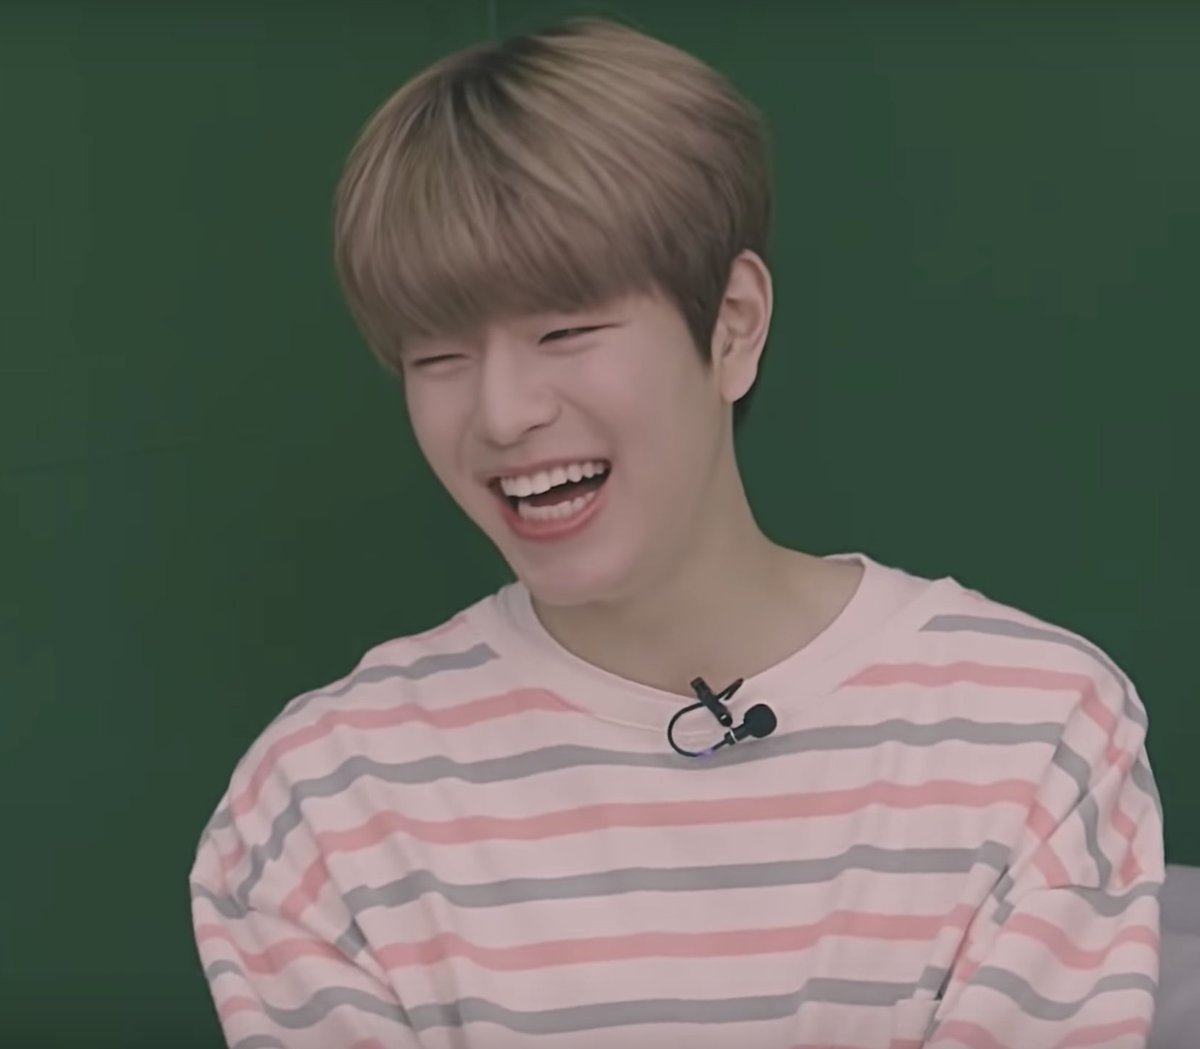 seungmin: "earlier today i asked lee know-hyung 'should we order food late tonight?' and he responded 'are you crazy?' so i thought he wasn't going to. but then he asked 'what are you going to eat?'" https://twitter.com/shmesm2/status/1248580448558575622